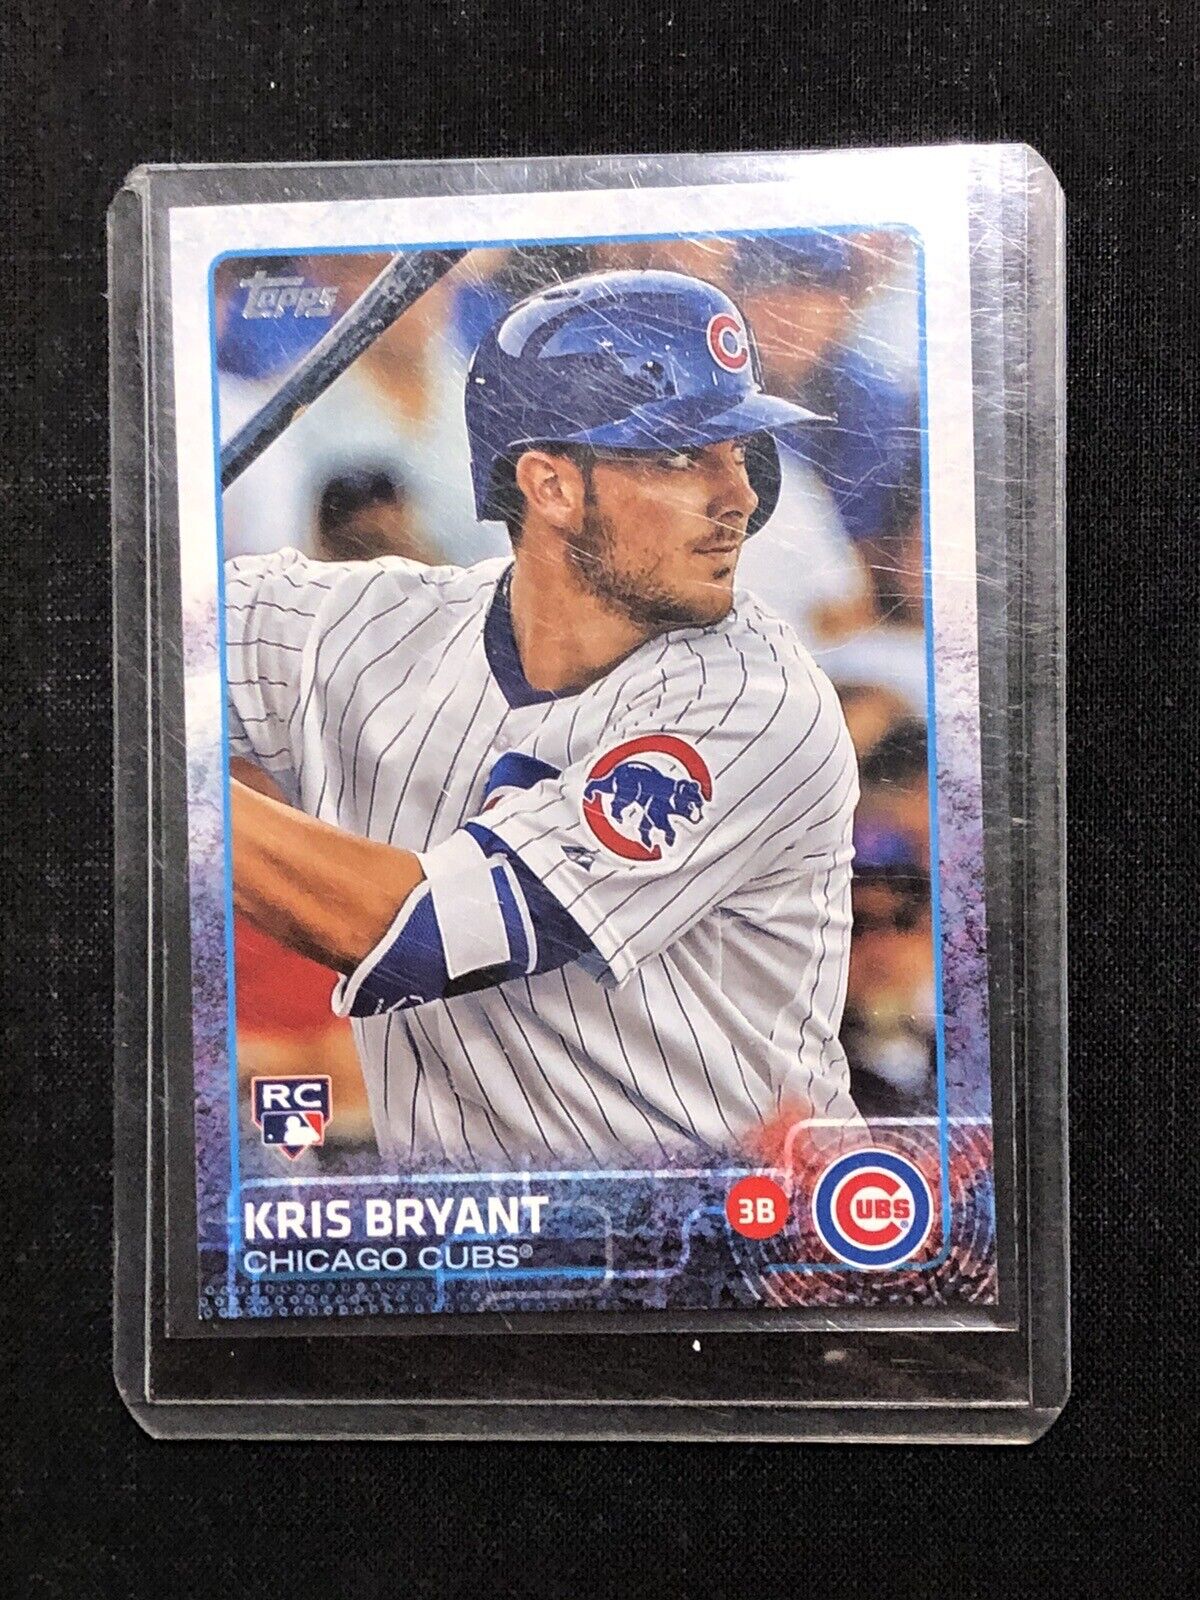 2015 Topps Kris Bryant RC Rookie Chicago Cubs Baseball Card #616